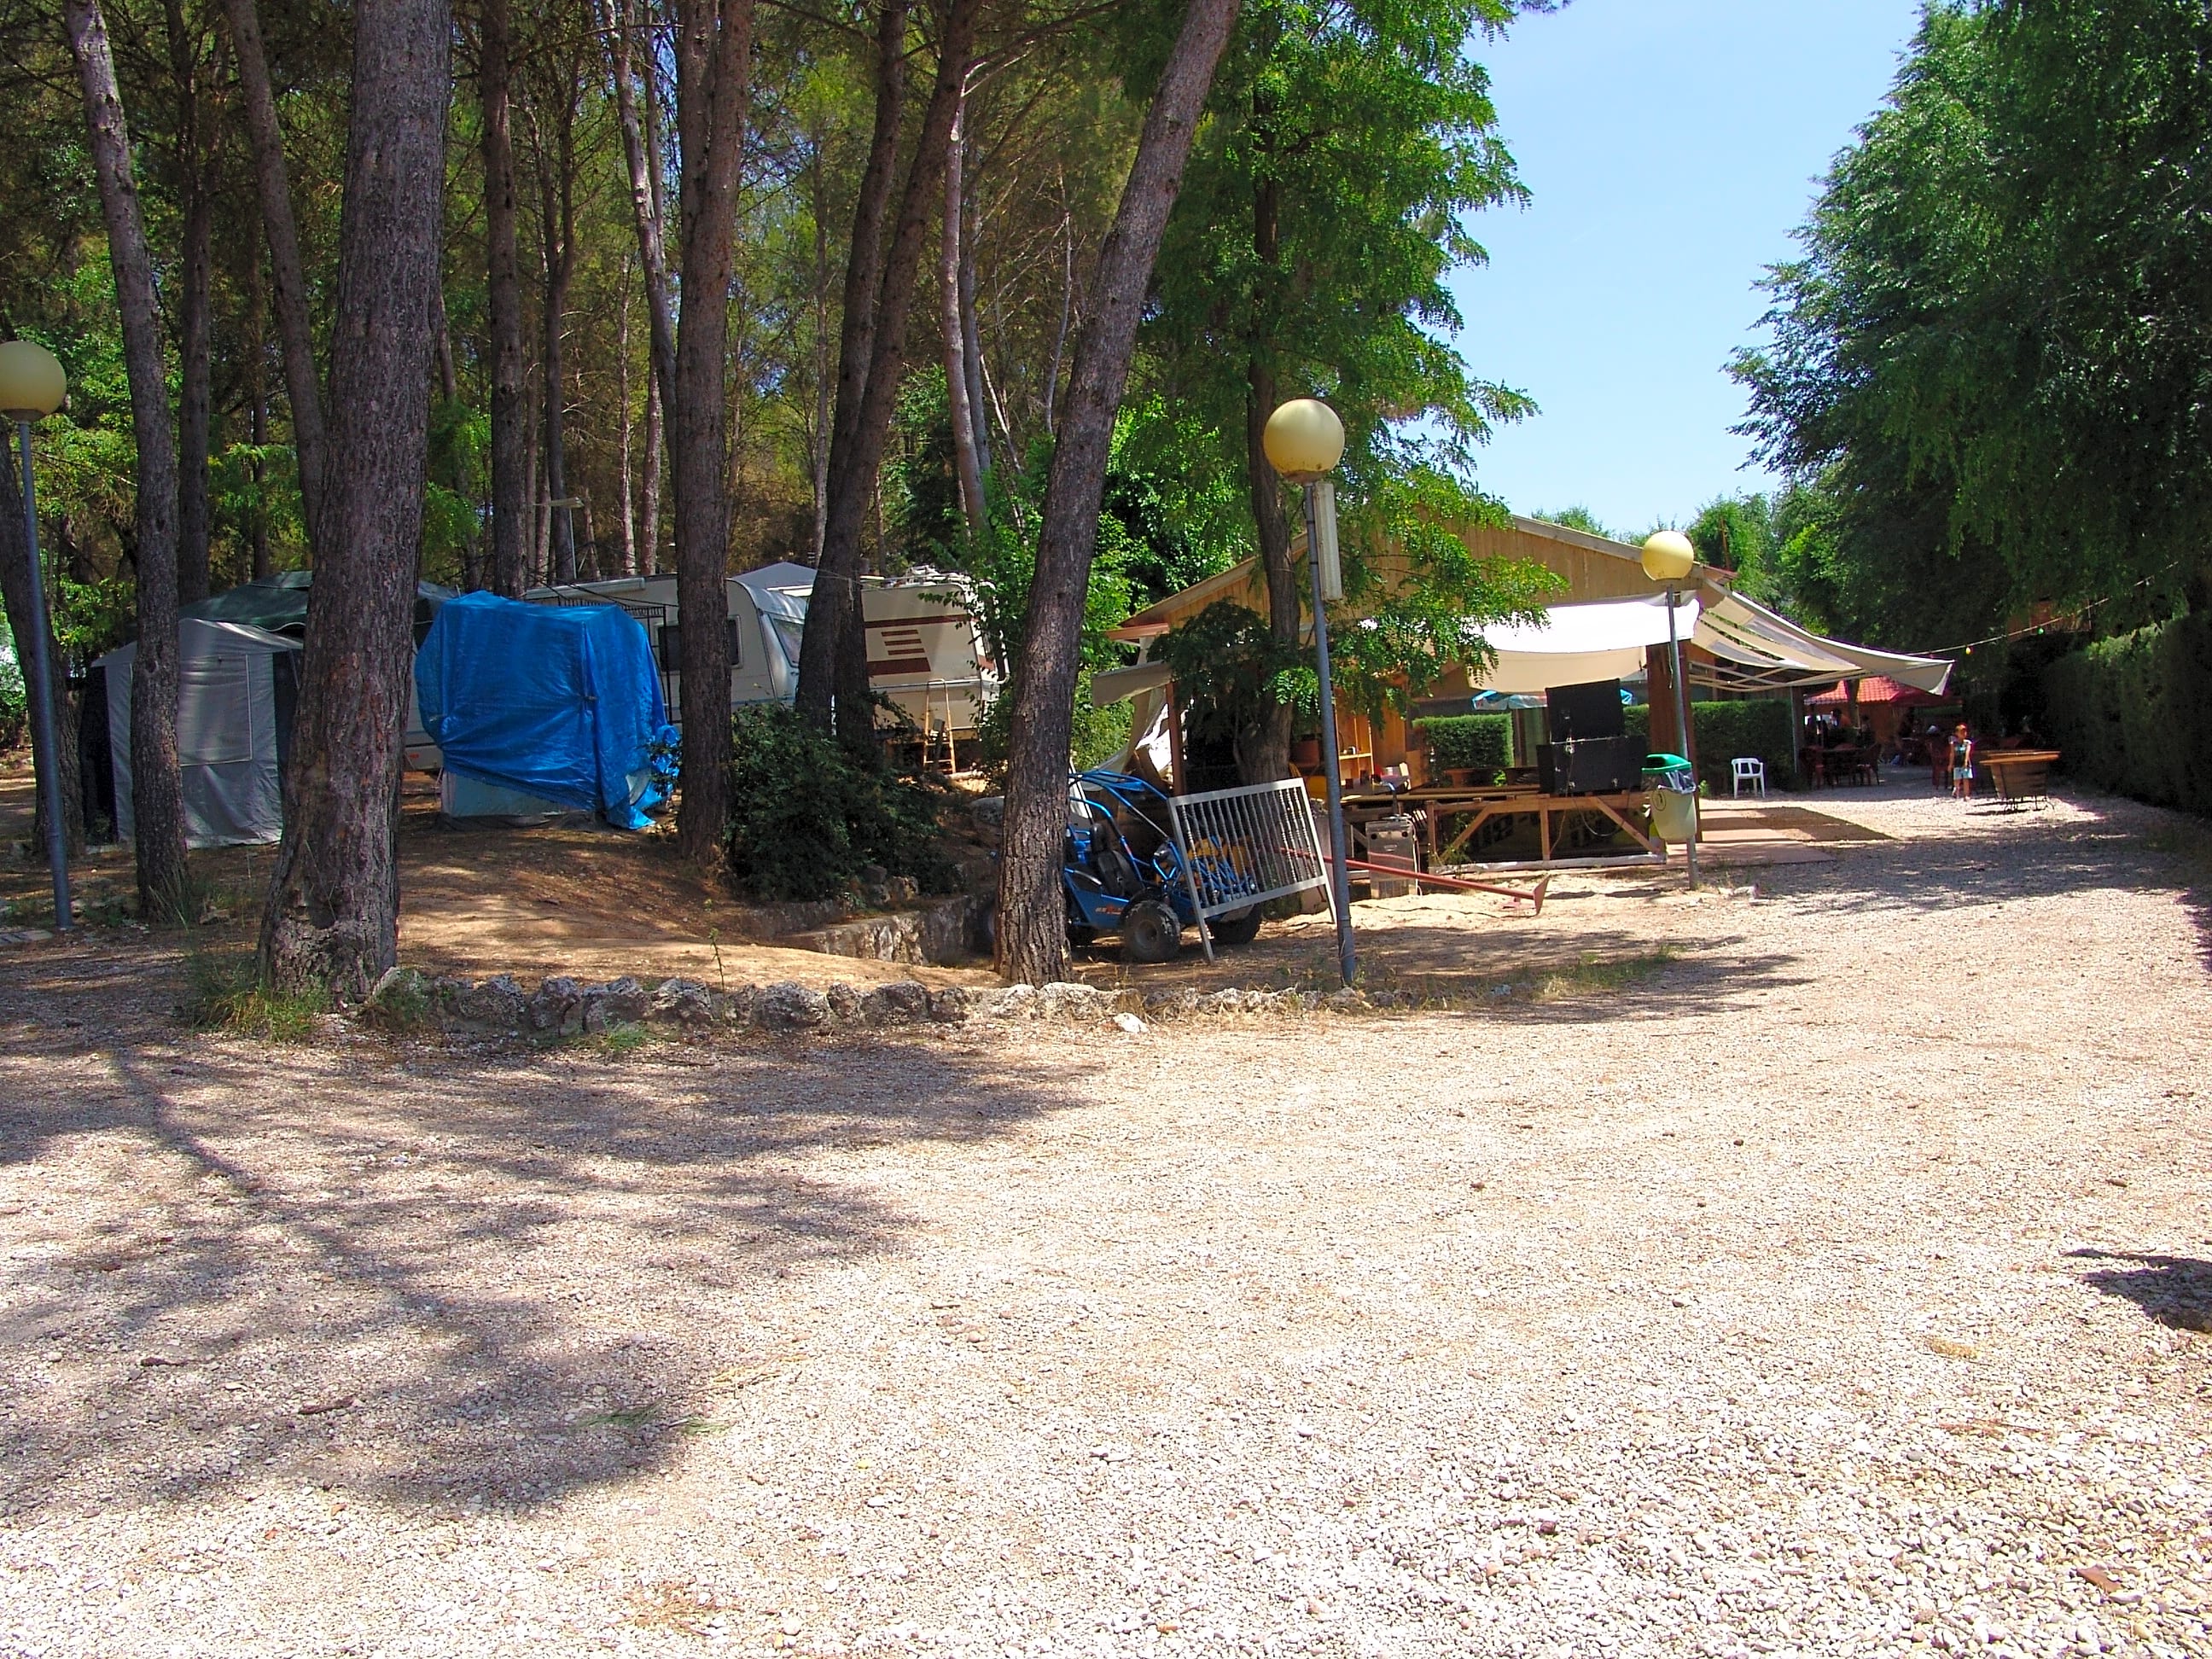 Camping Sacedón Ecomillans, Sacedón - Updated 2021 prices - Pitchup®